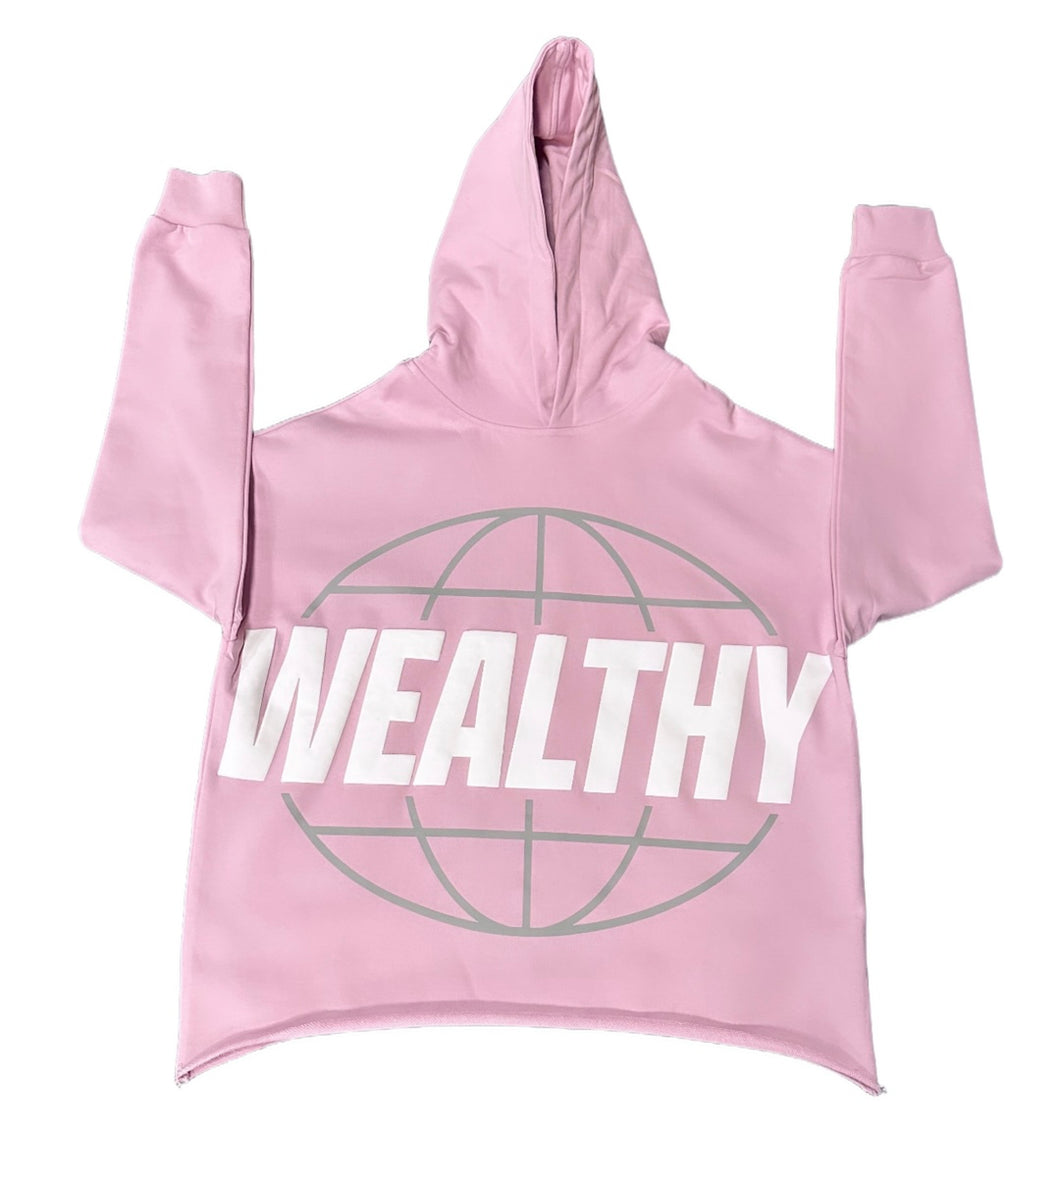 Wealthy Cropped Hoodie (Soft Pink/Grey/White)